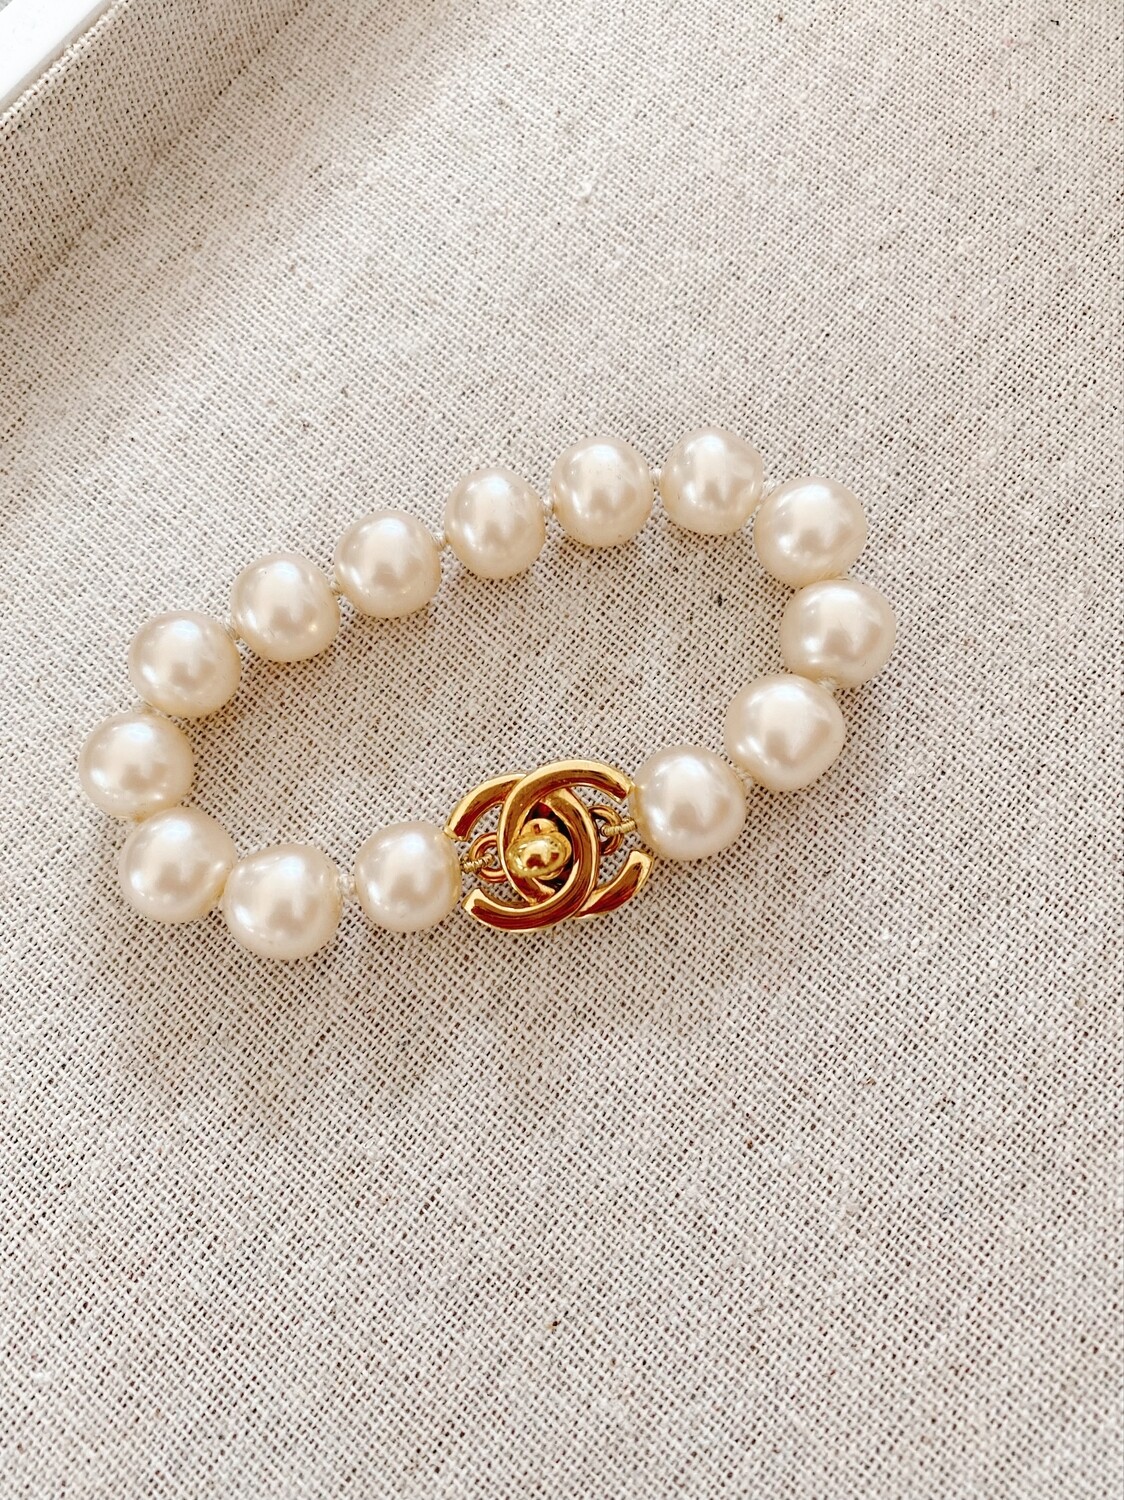 CHANEL GOLD TONE CC BRACELET WITH PEARLS - Hebster Boutique